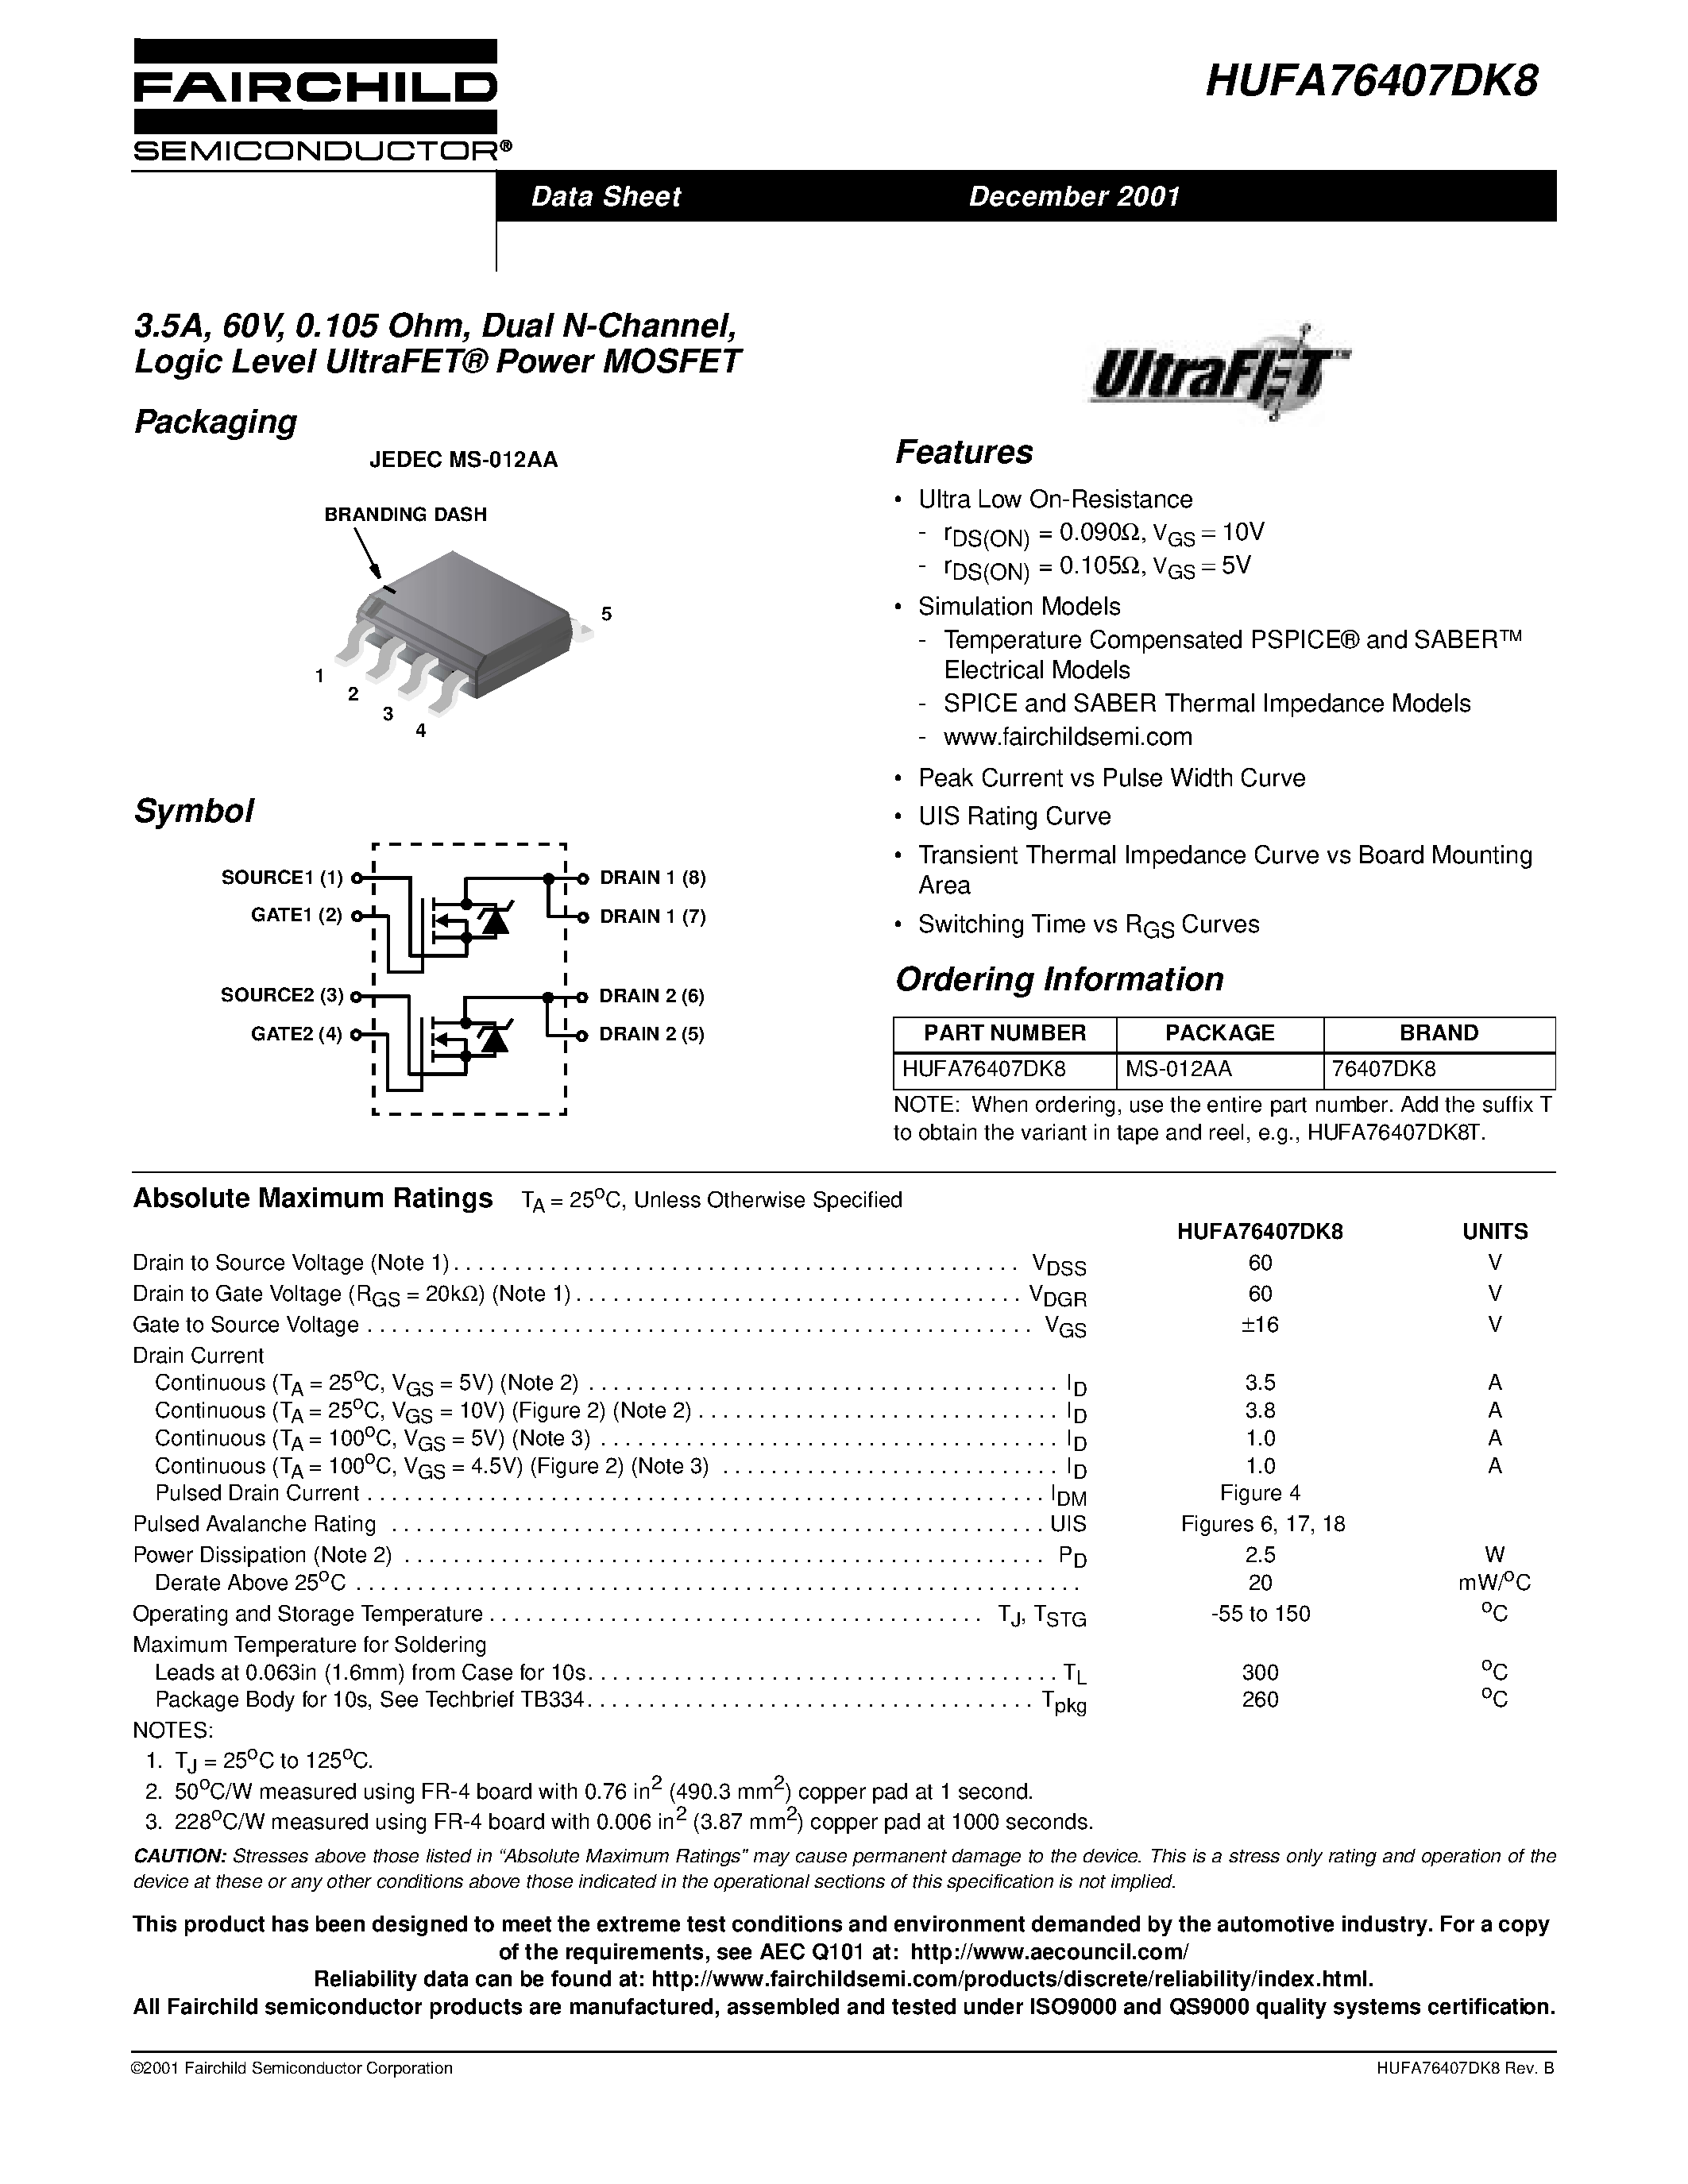 Datasheet HUFA76407DK8 - 3.5A/ 60V/ 0.105 Ohm/ Dual N-Channel/ Logic Level UltraFET Power MOSFET page 1